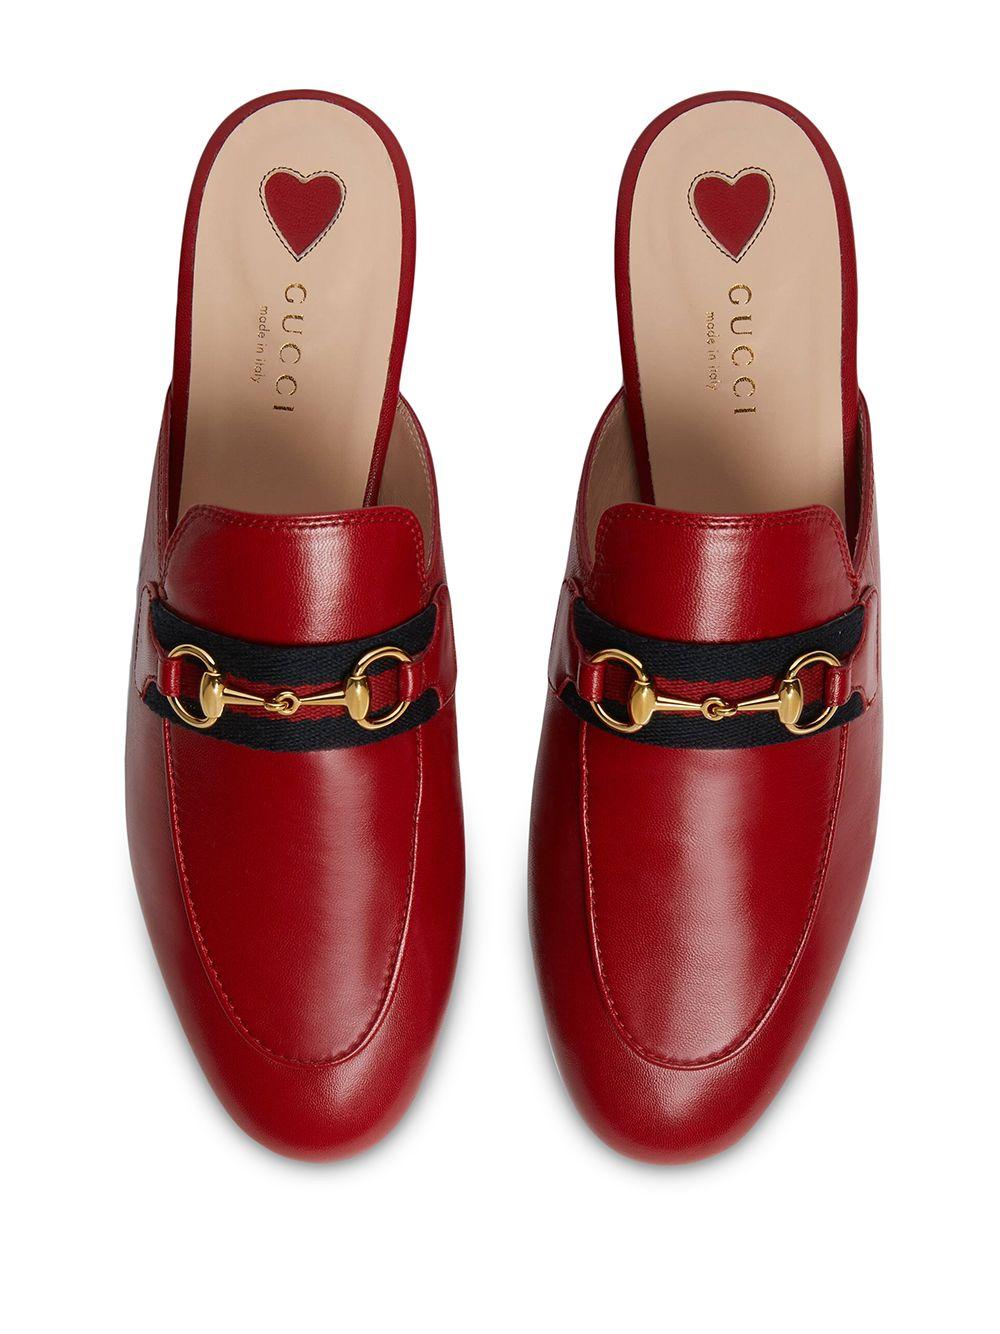 Gucci Leather Princetown Slides in Red 